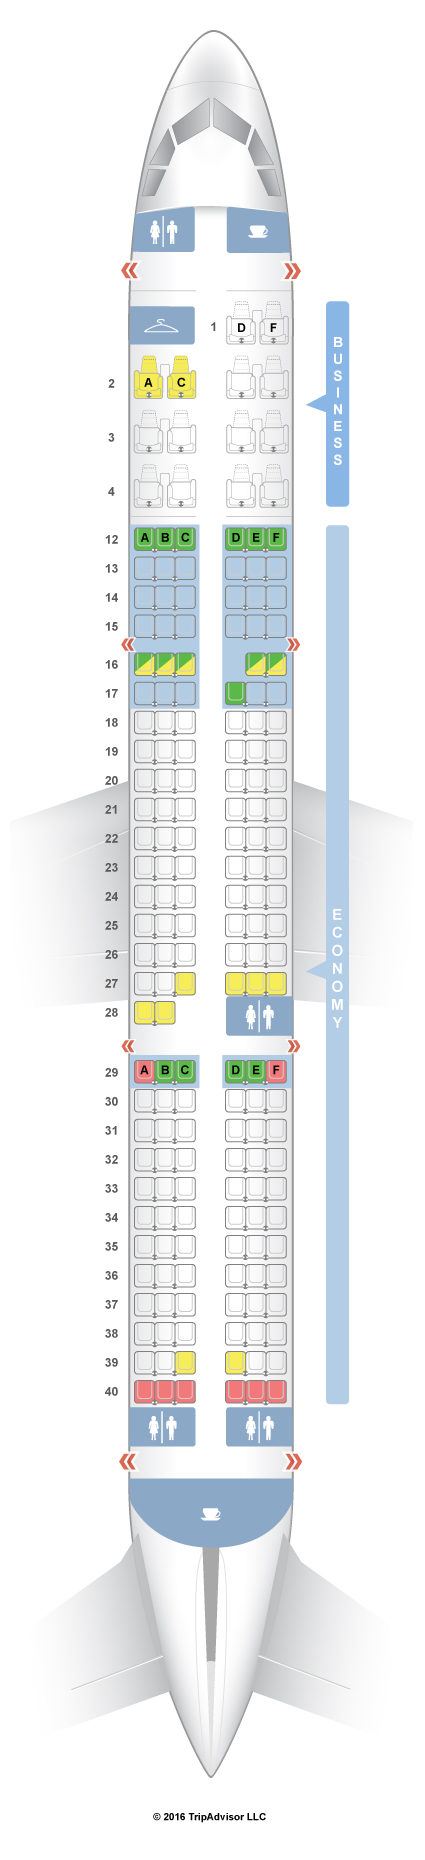 seat assignment on air canada